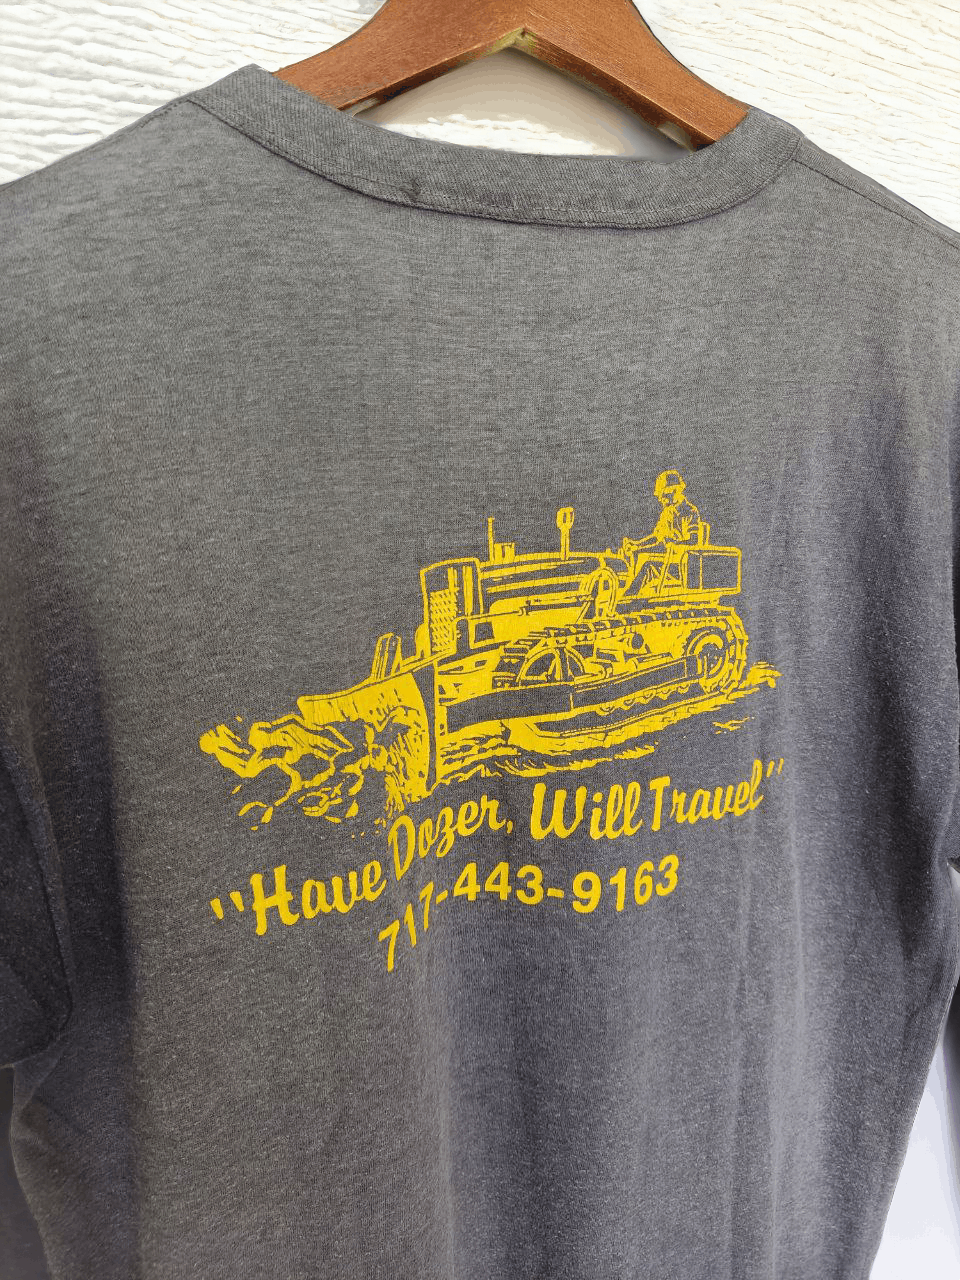 Vintage 80s The Earth Mover Fred W Shearan Tee - 3